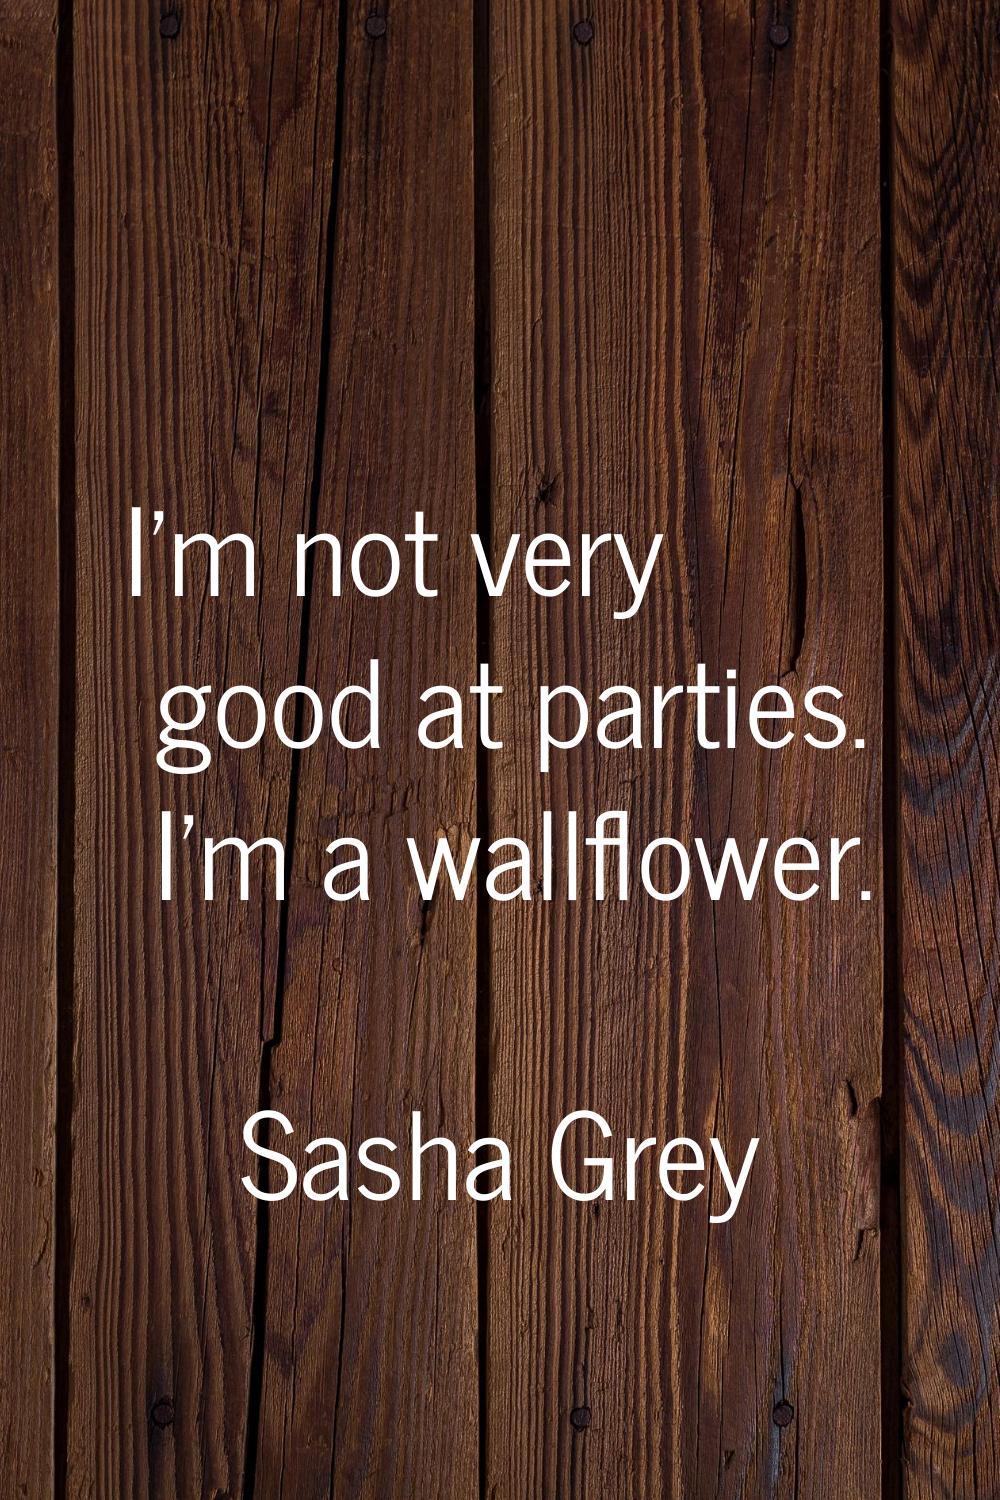 I'm not very good at parties. I'm a wallflower.